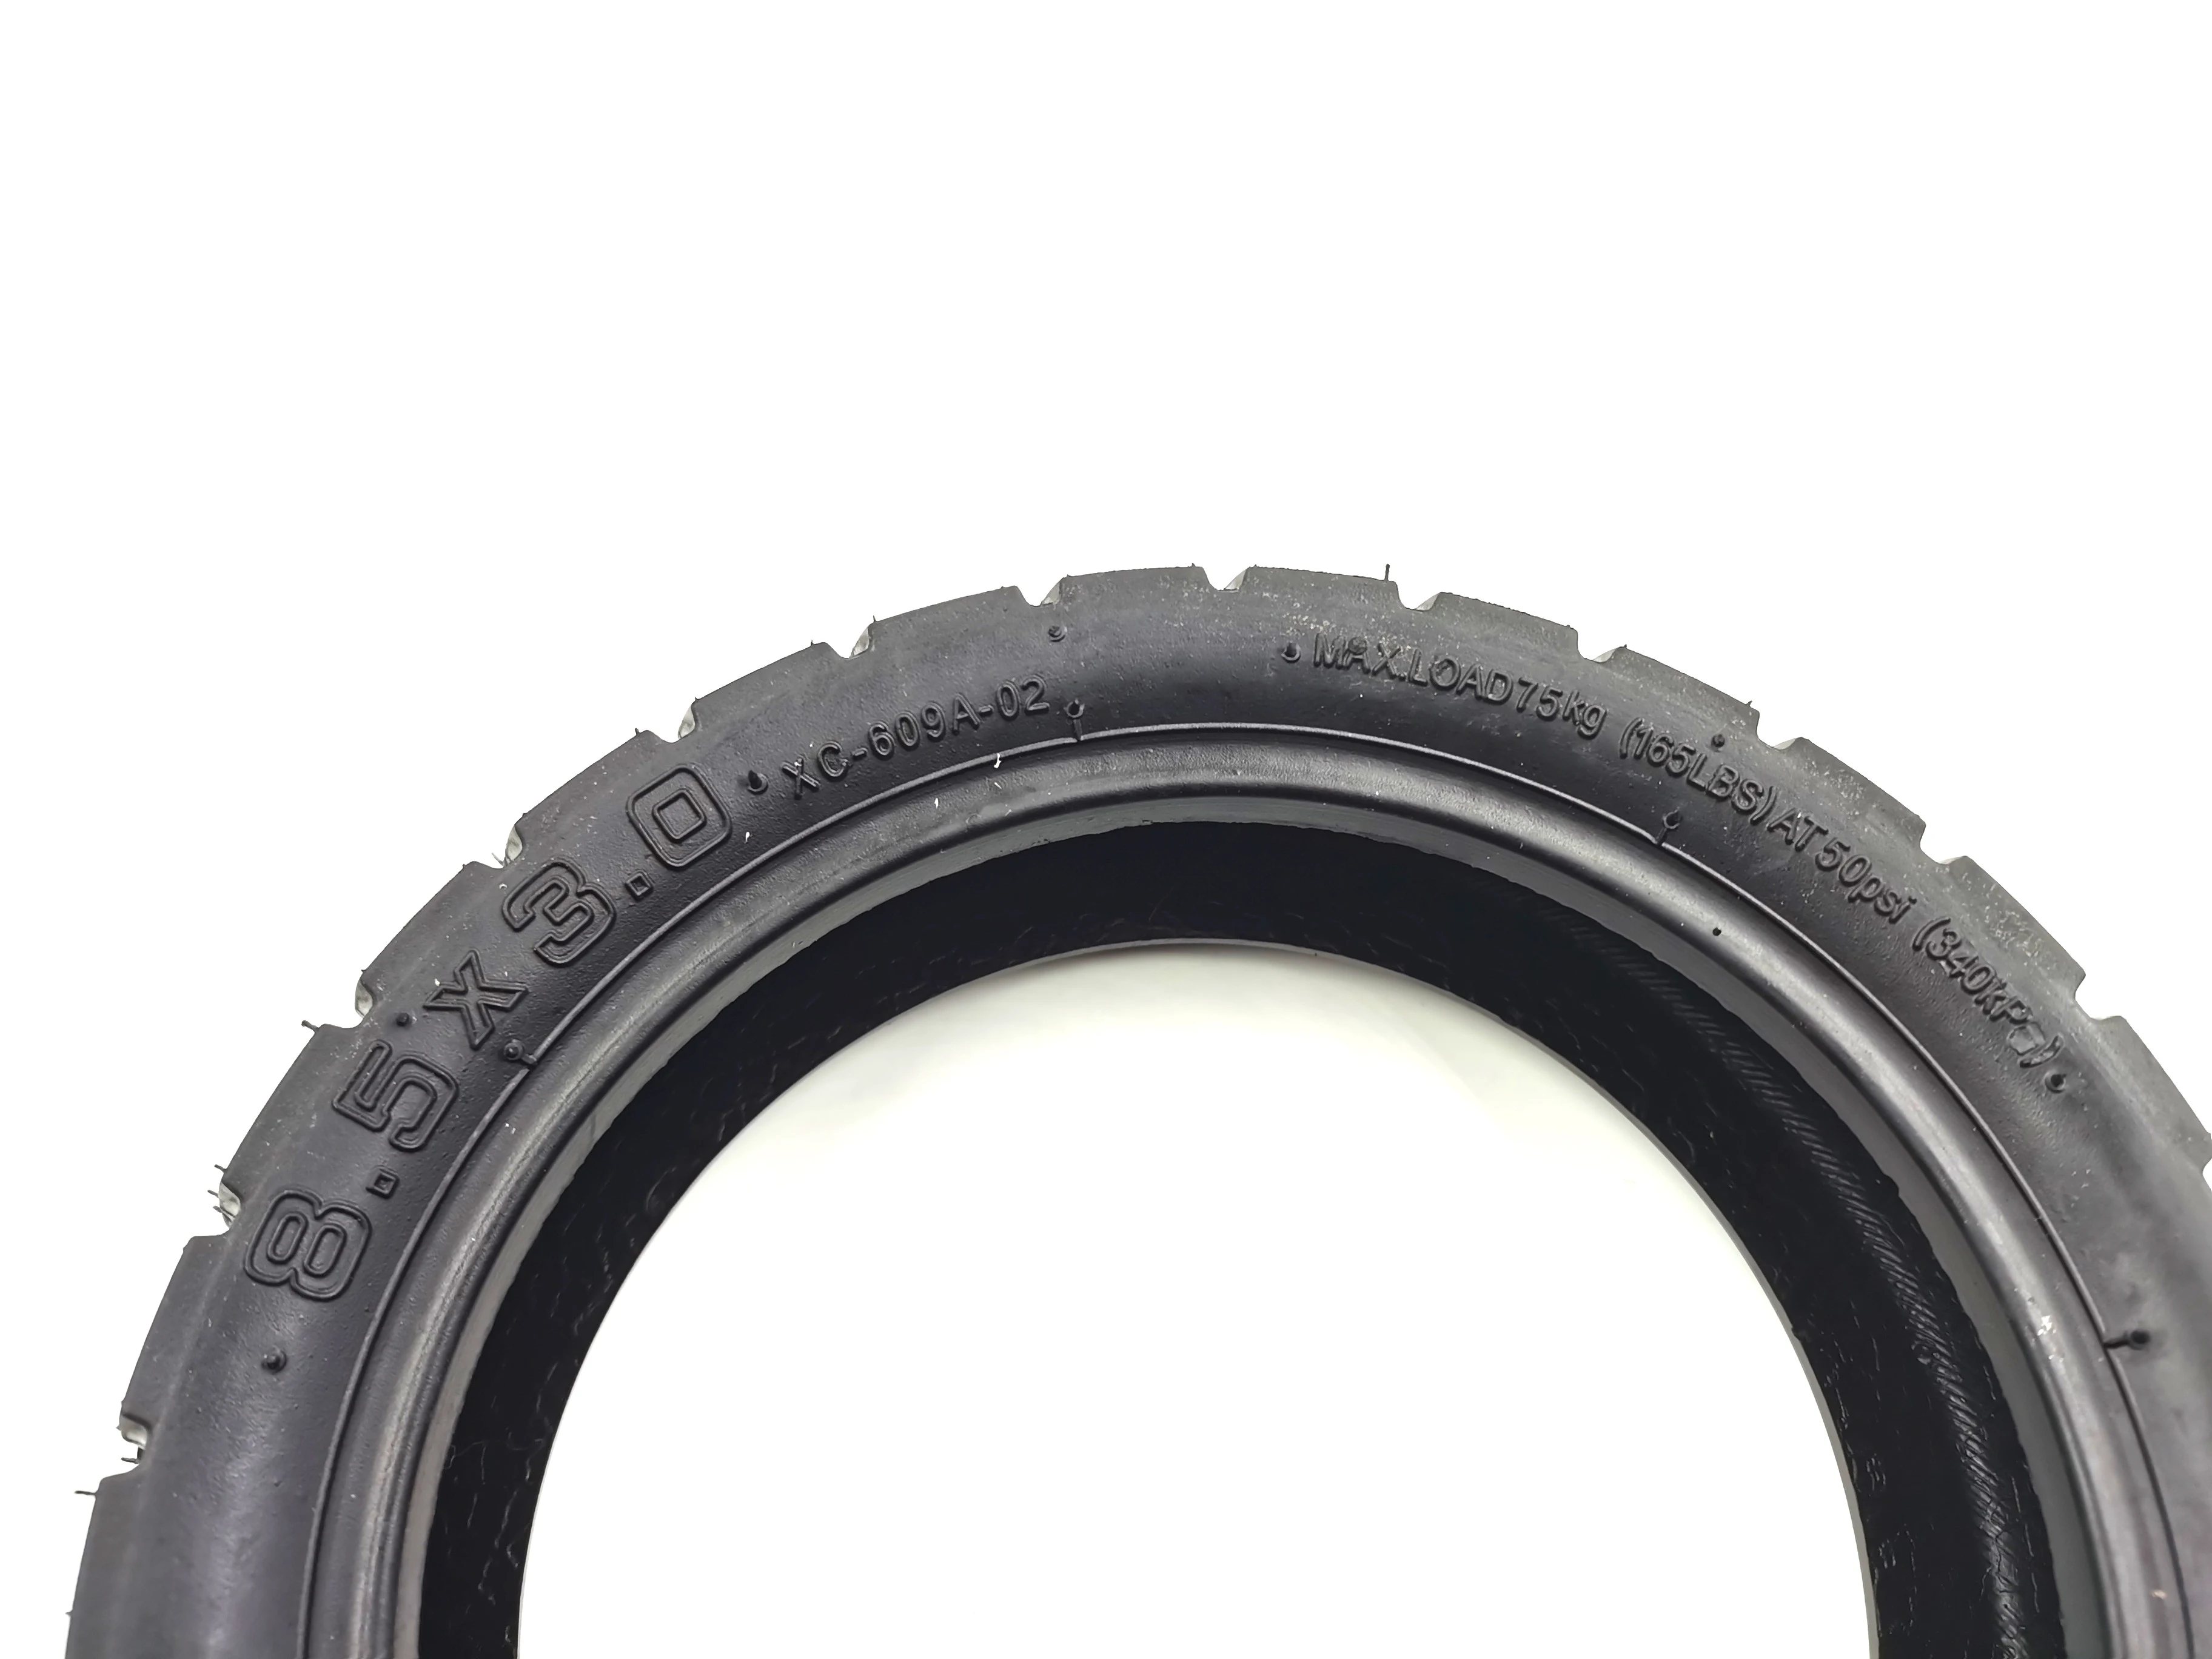 8.5x3.0 Tire for Dualtron Mini and Xiaomi M365/Pro/Mi 3 Series Electric Scooter Upgrade 8 1/2x2 Widened Thickened Anti-skid Tyre